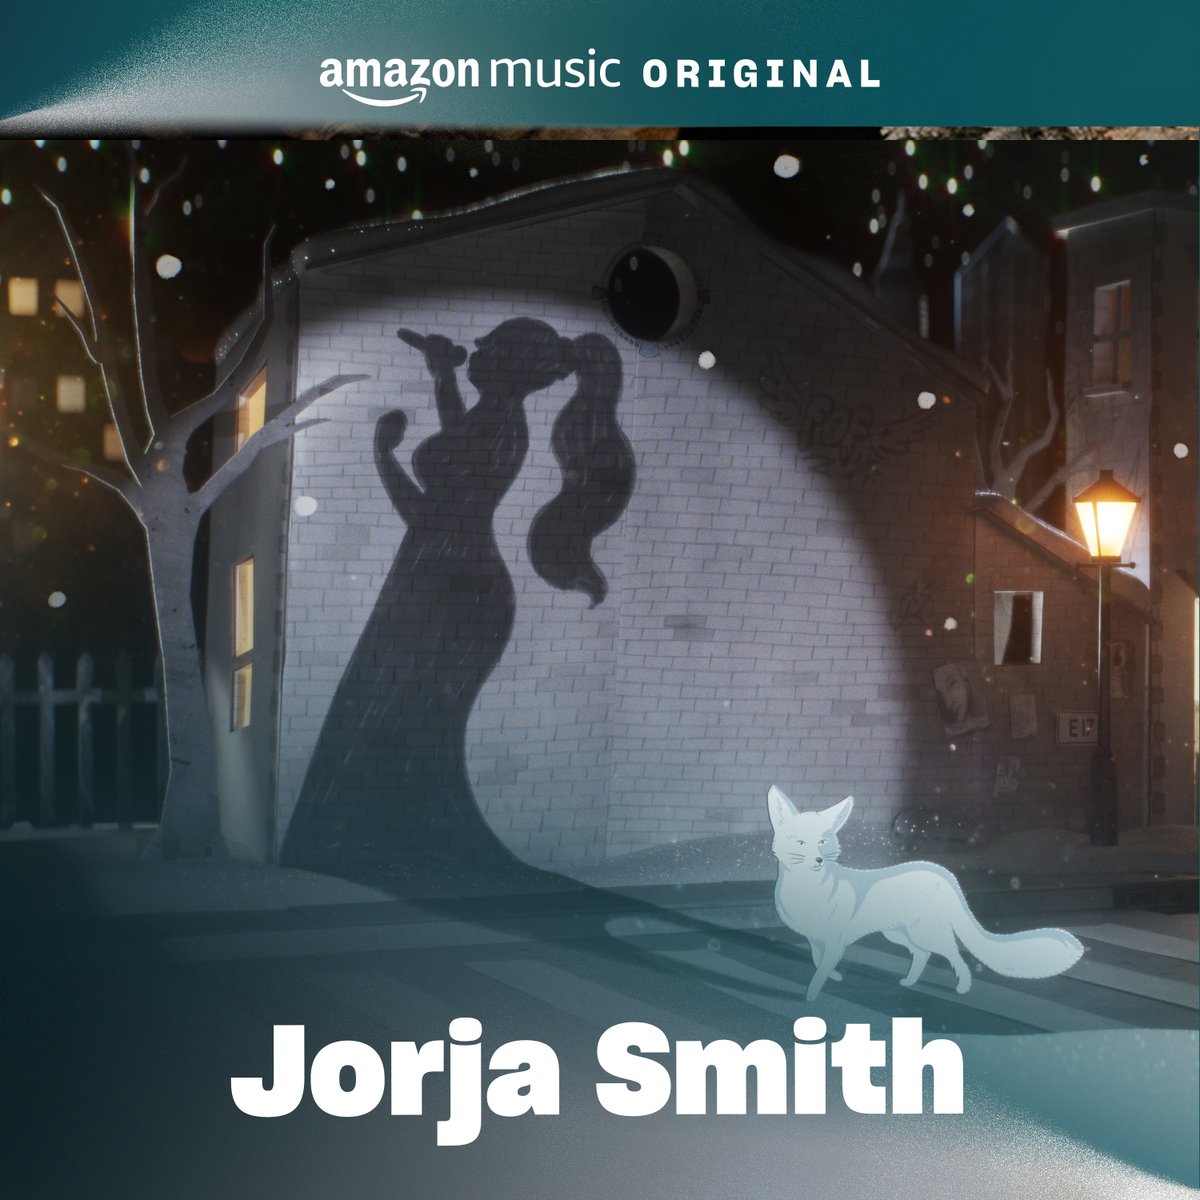 Jorja has covered a timeless Christmas classic! @amazonmusicuk ❄️🤍 listen to her cover of #east17's 'Stay Another Day' out now > amzn.to/JorjaSmithAMO